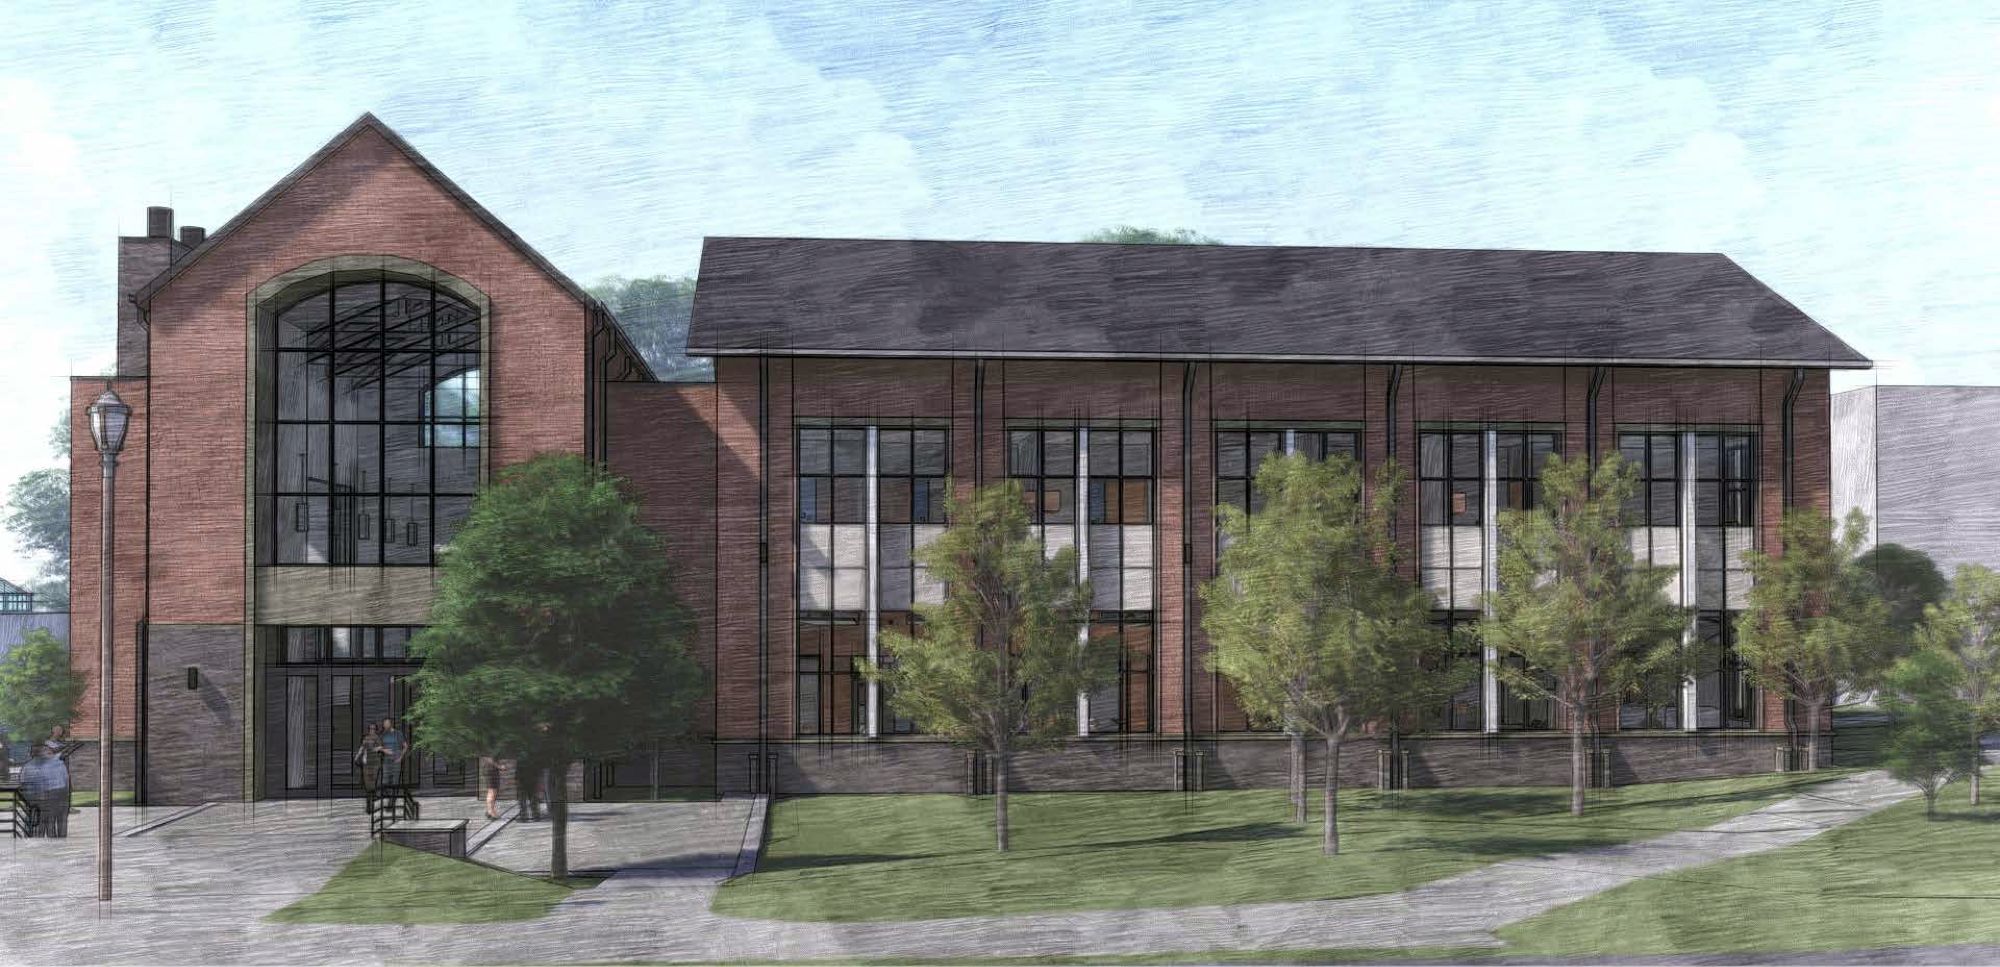 The Oxford Student Center will include a campus bookstore, convenience store, and a café/dining option.